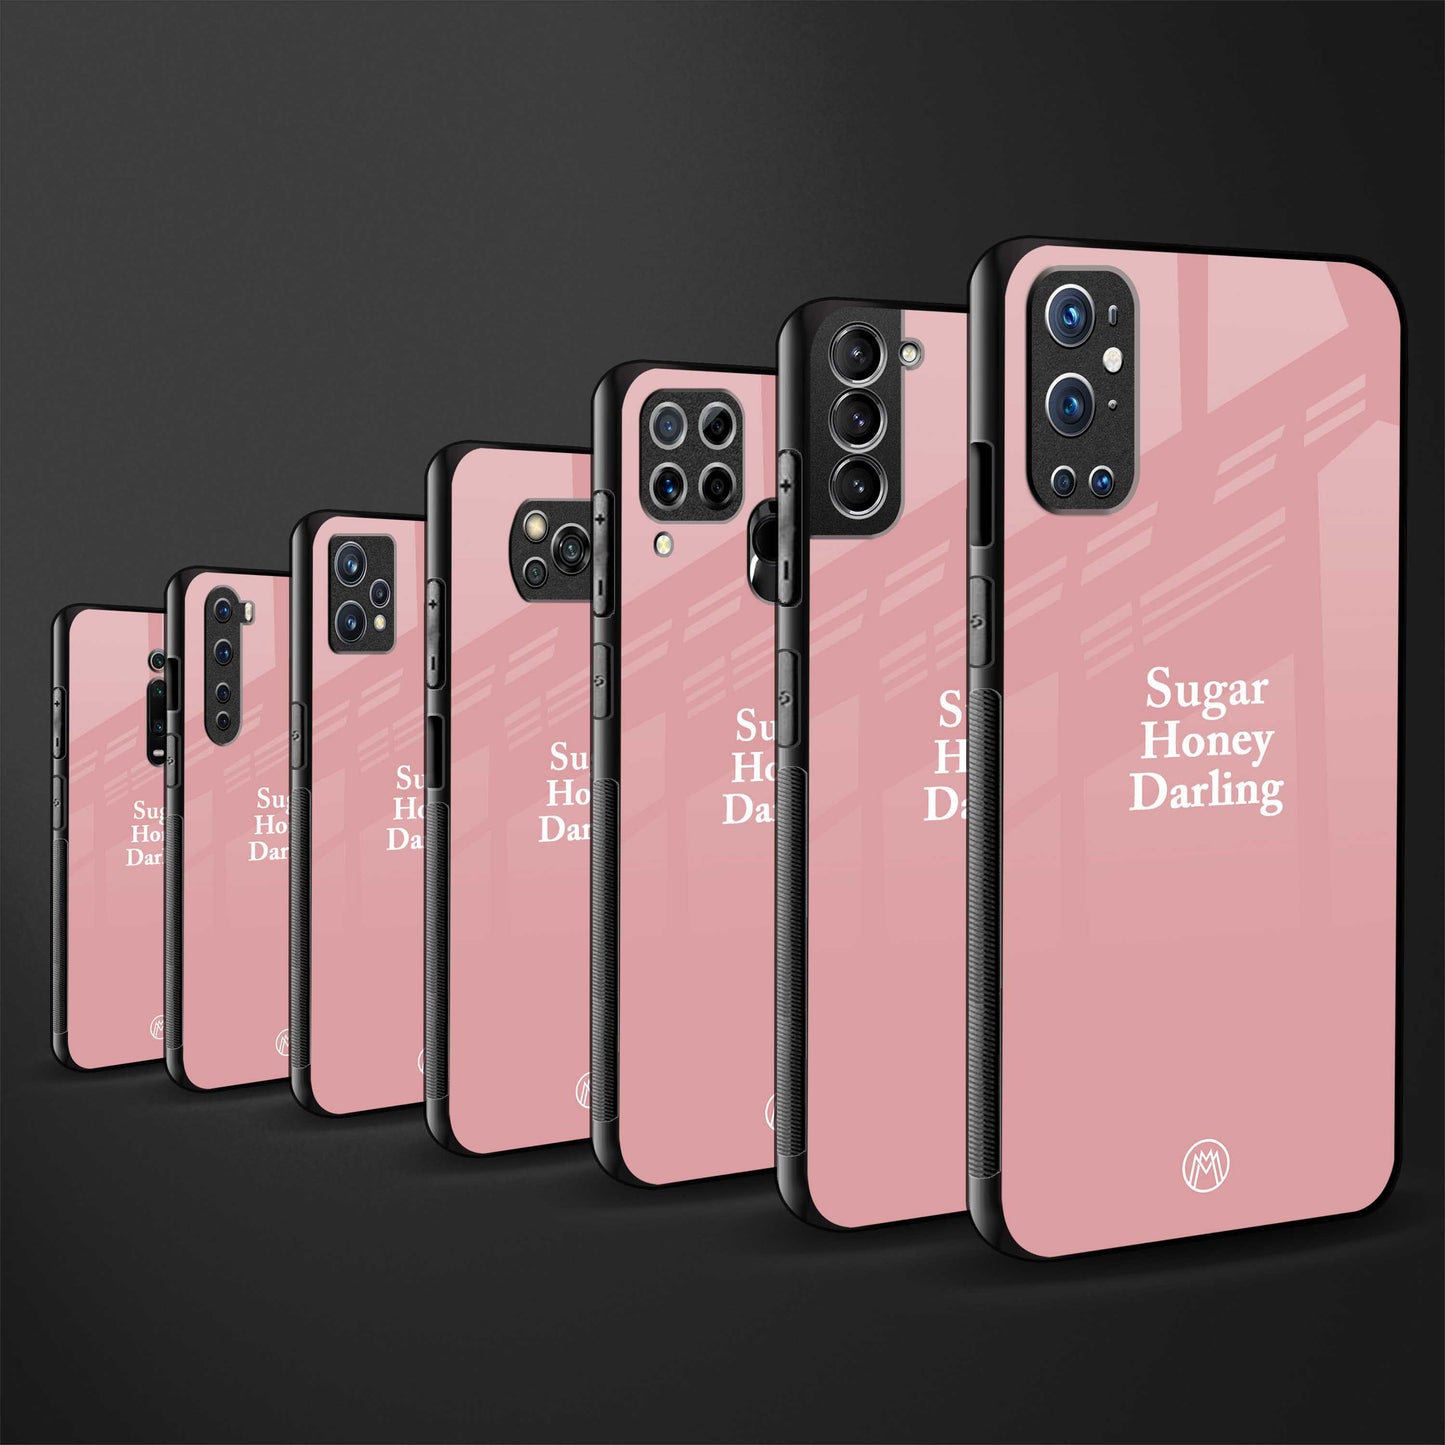 suger honey darling glass case for iphone 11 image-3